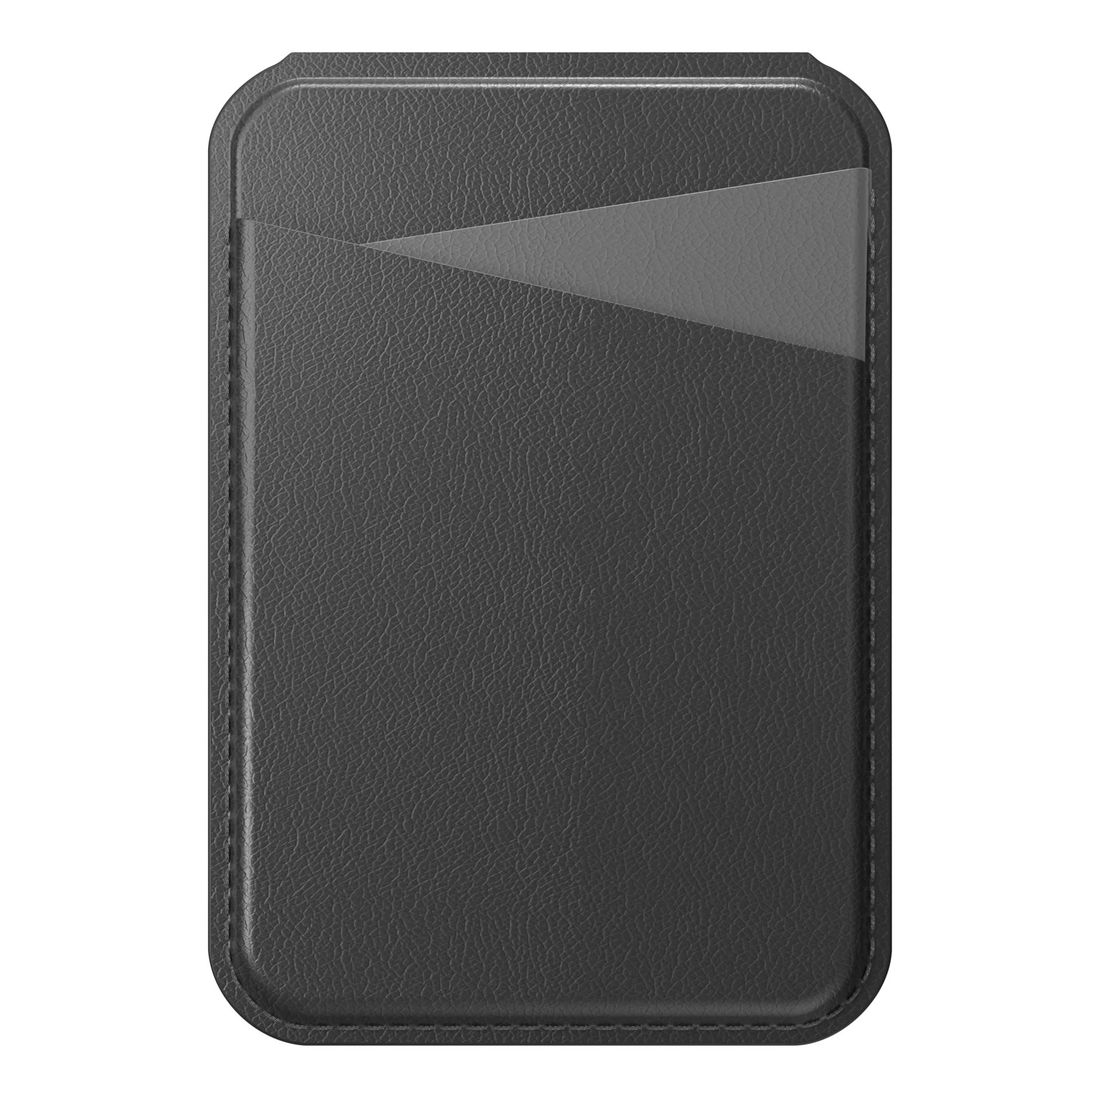 MagEasy Snap Stand Dual-Card Storage Wallet for iPhone - Classic Black